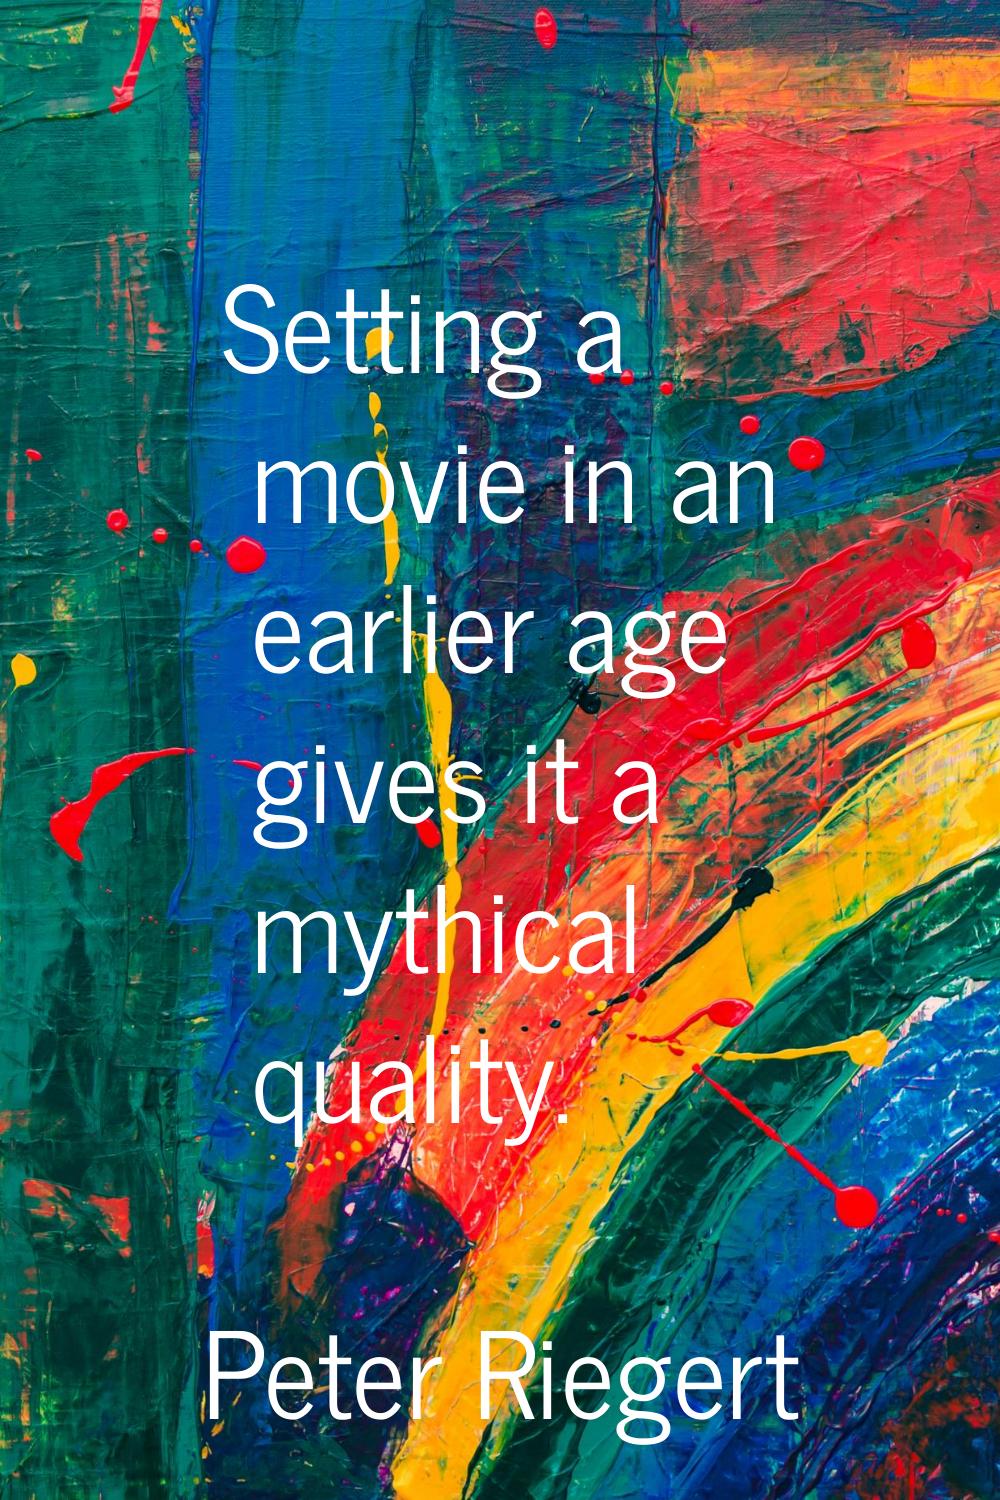 Setting a movie in an earlier age gives it a mythical quality.